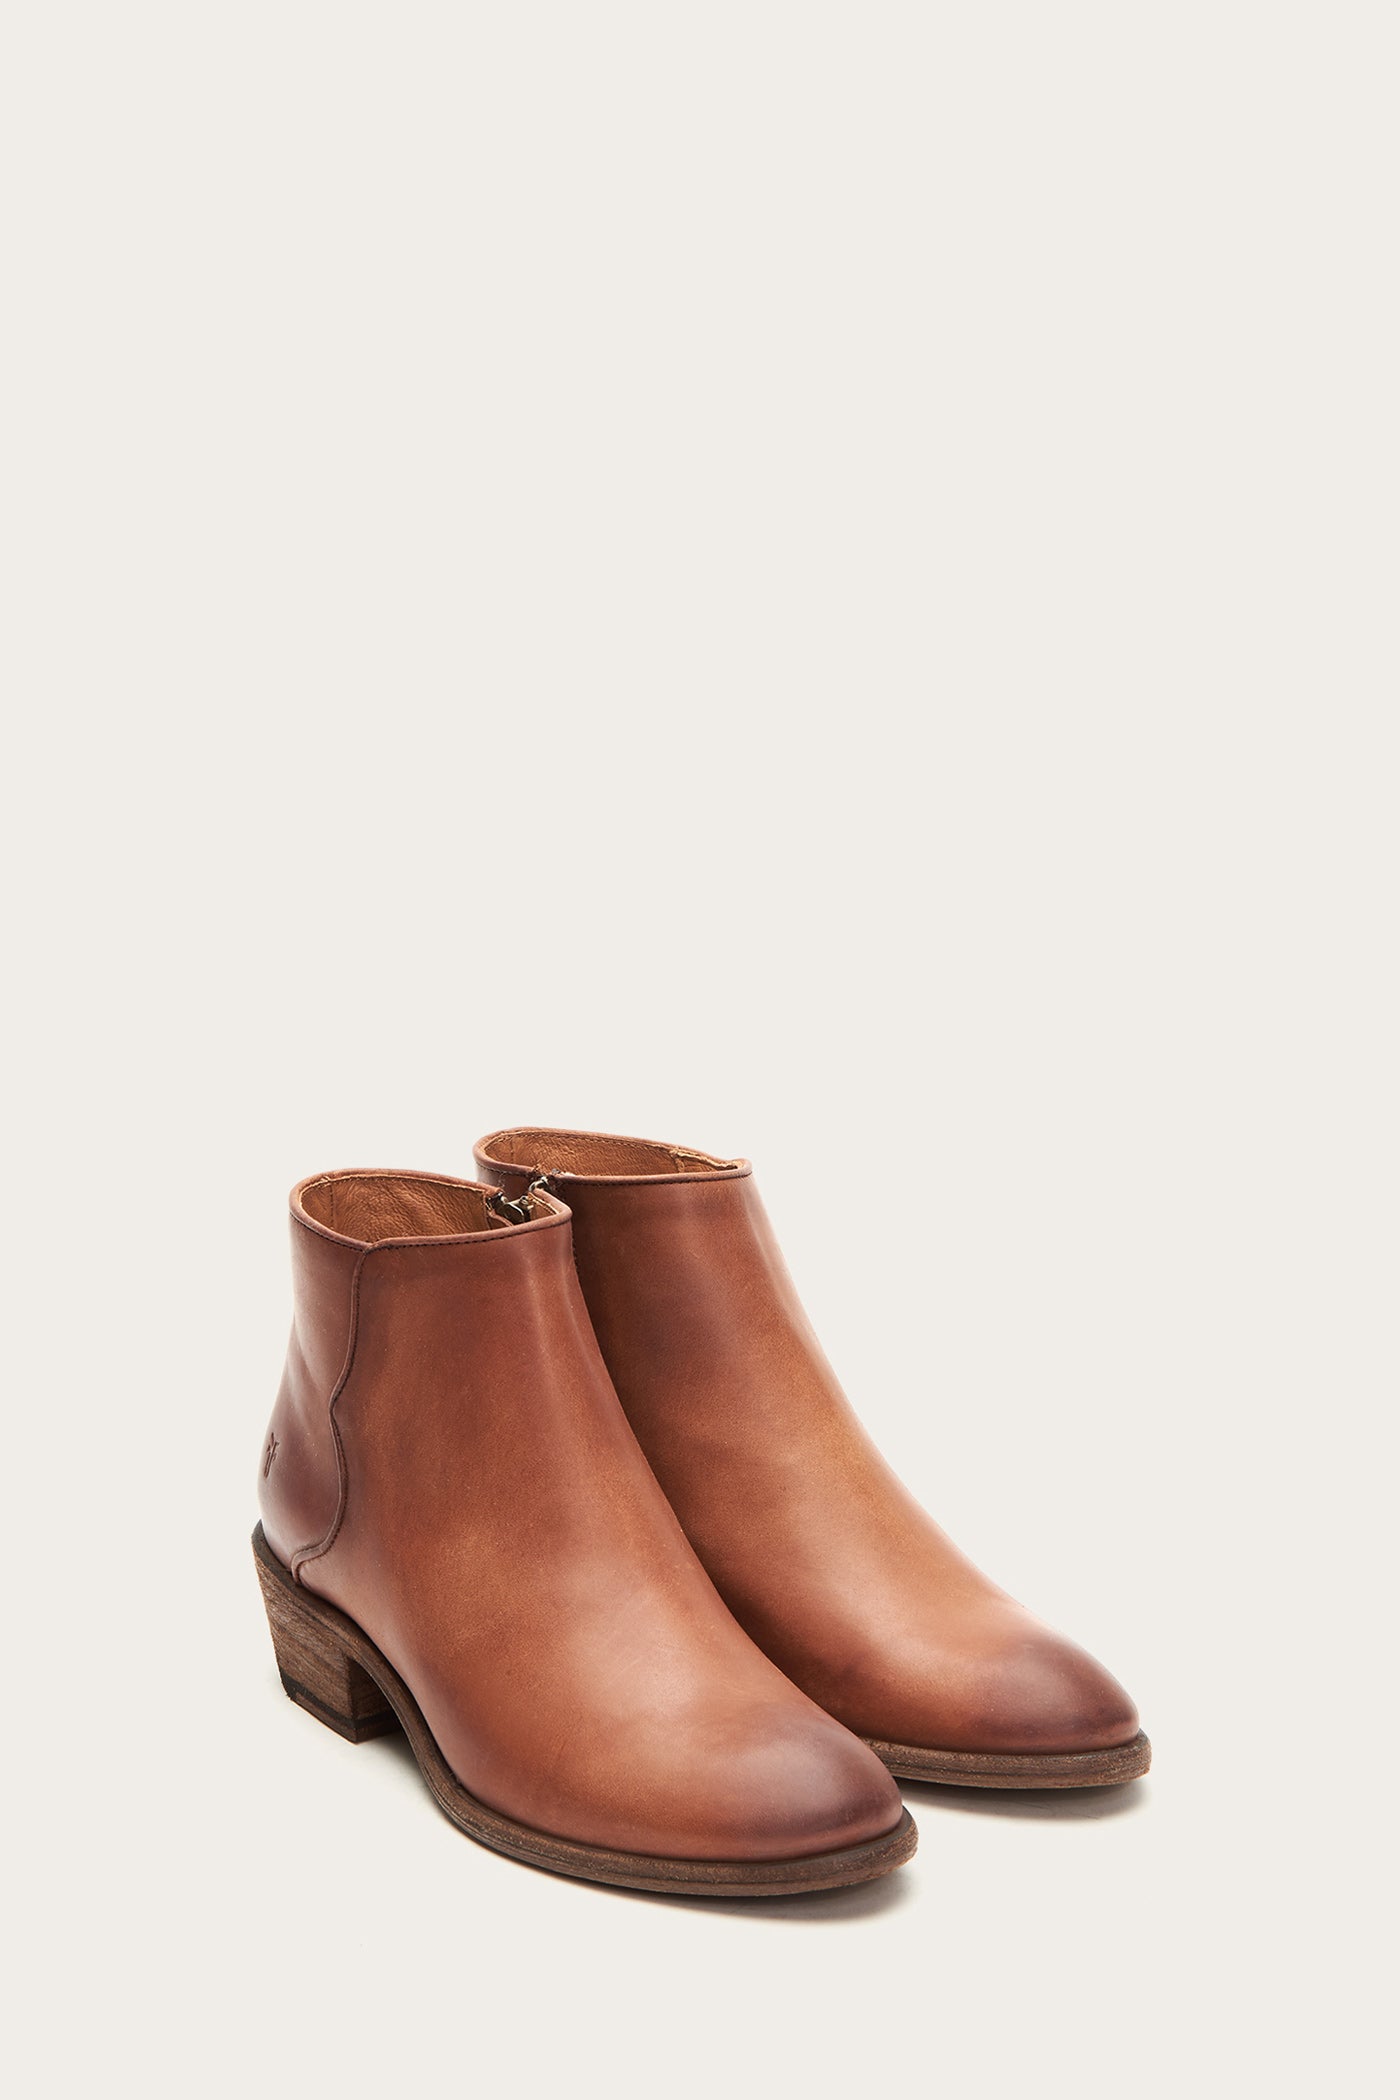 Carson Piping Bootie | FRYE Since 1863